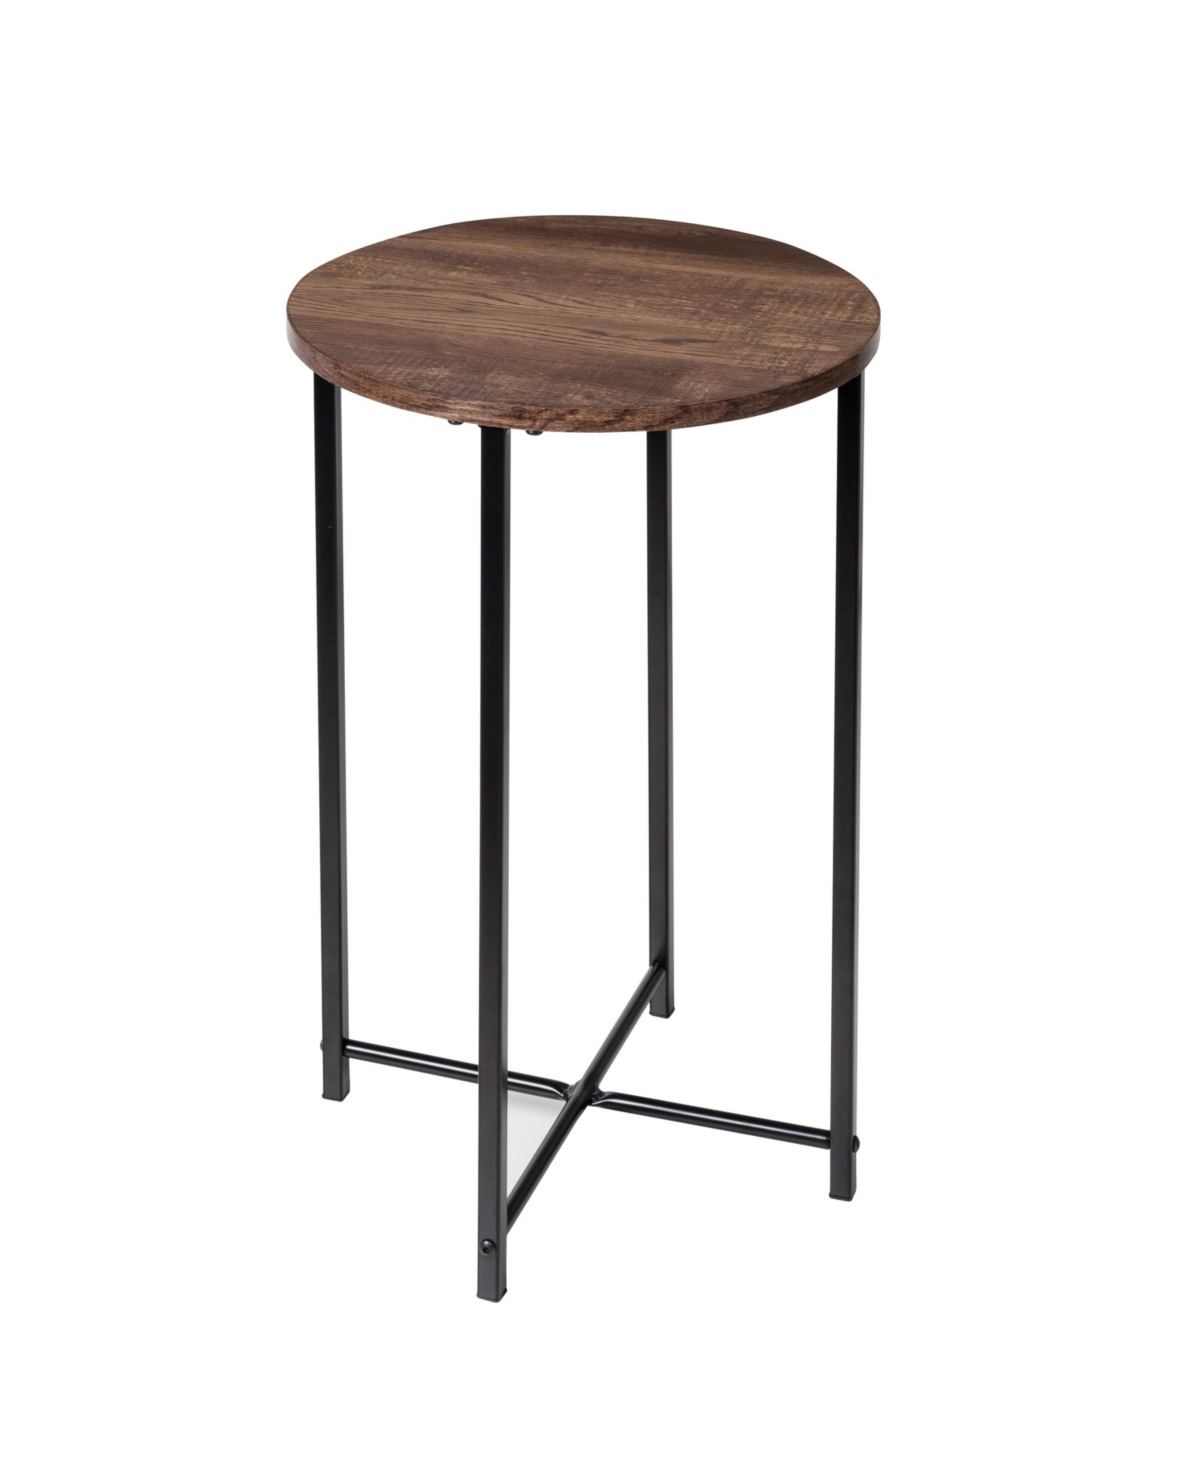 X-Pattern Base with Round Side Table - Black